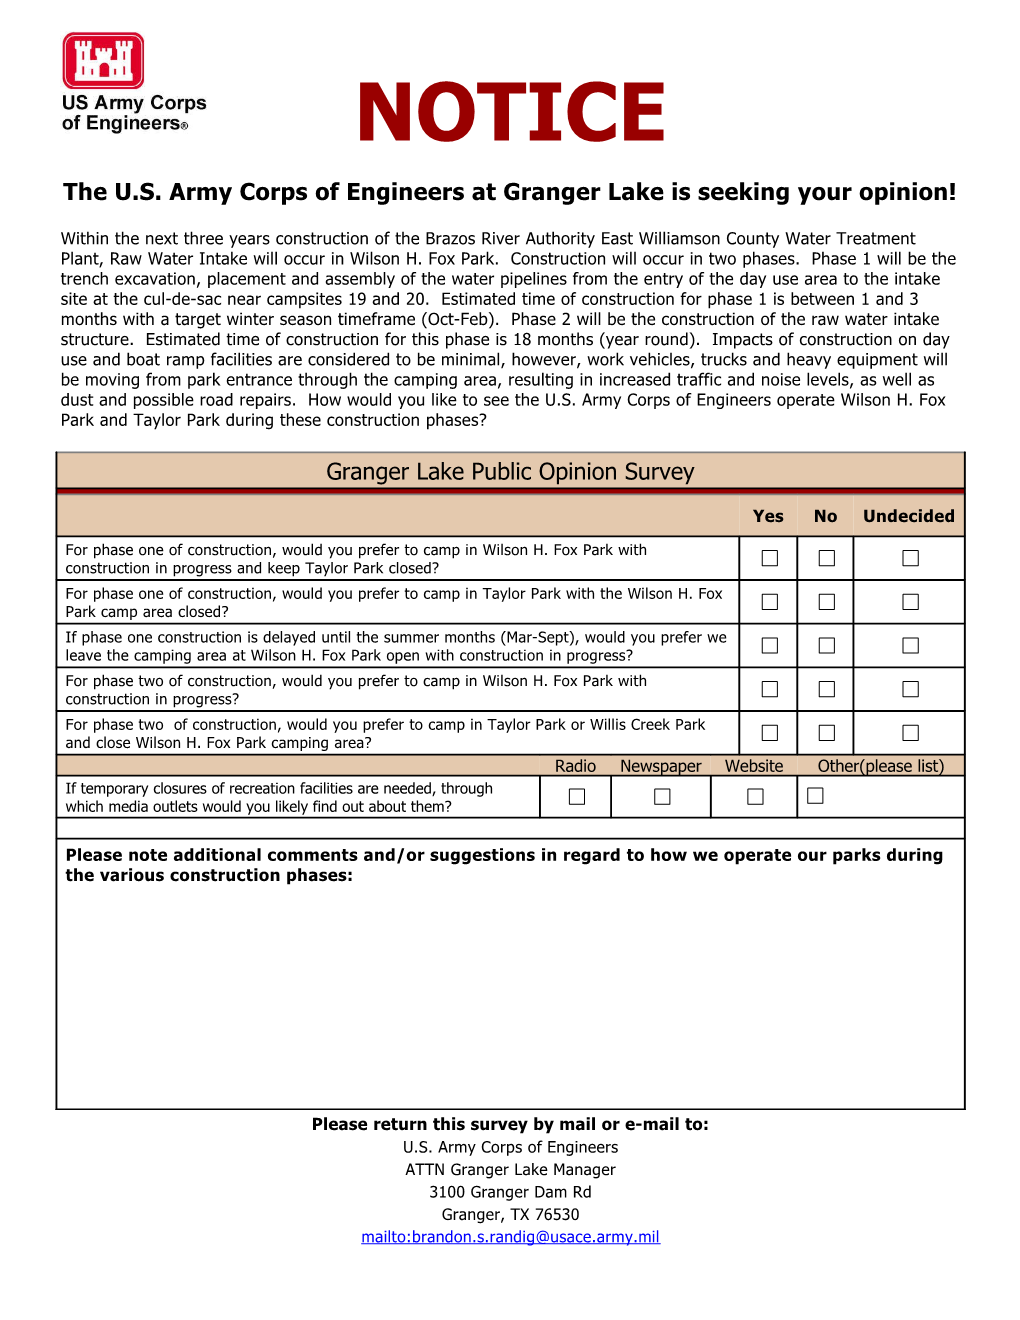 The U.S. Army Corps of Engineers at Granger Lake Is Seeking Your Opinion!